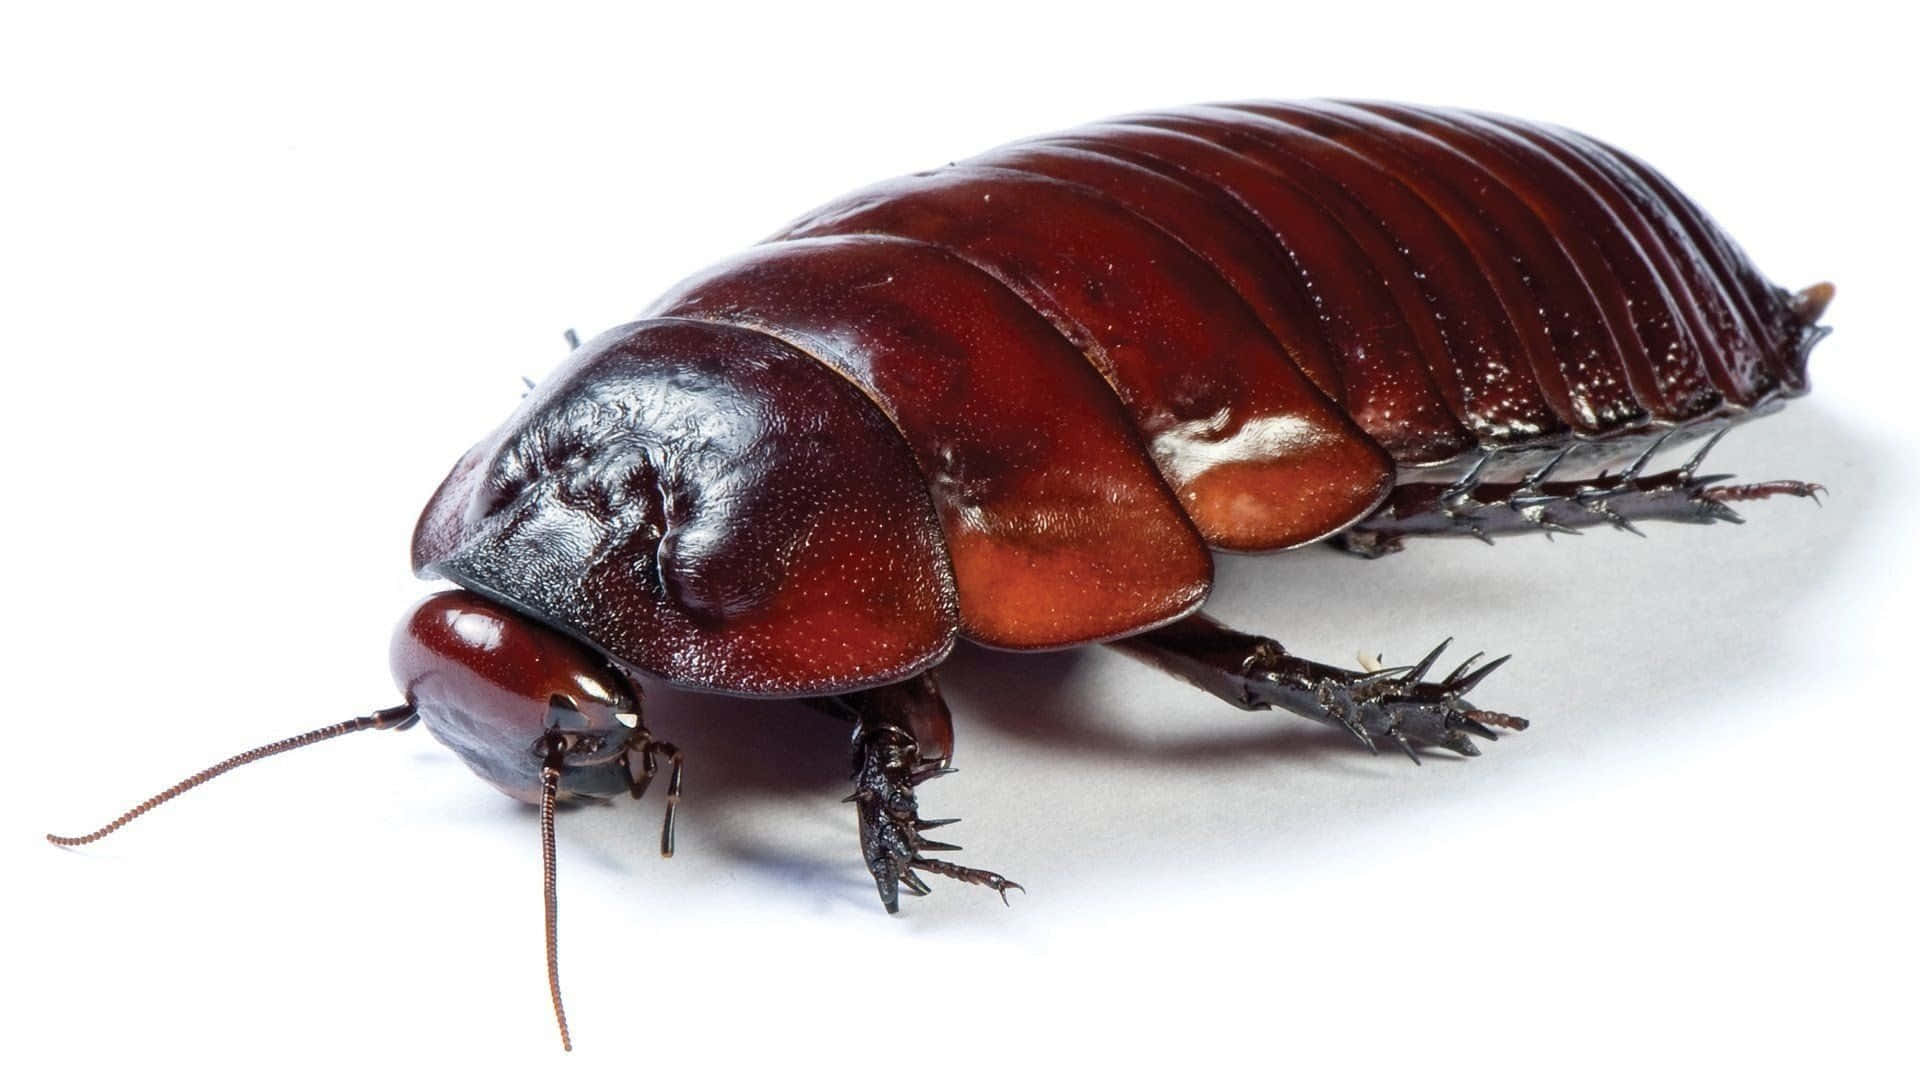 A Brown Cockroach On A White Background